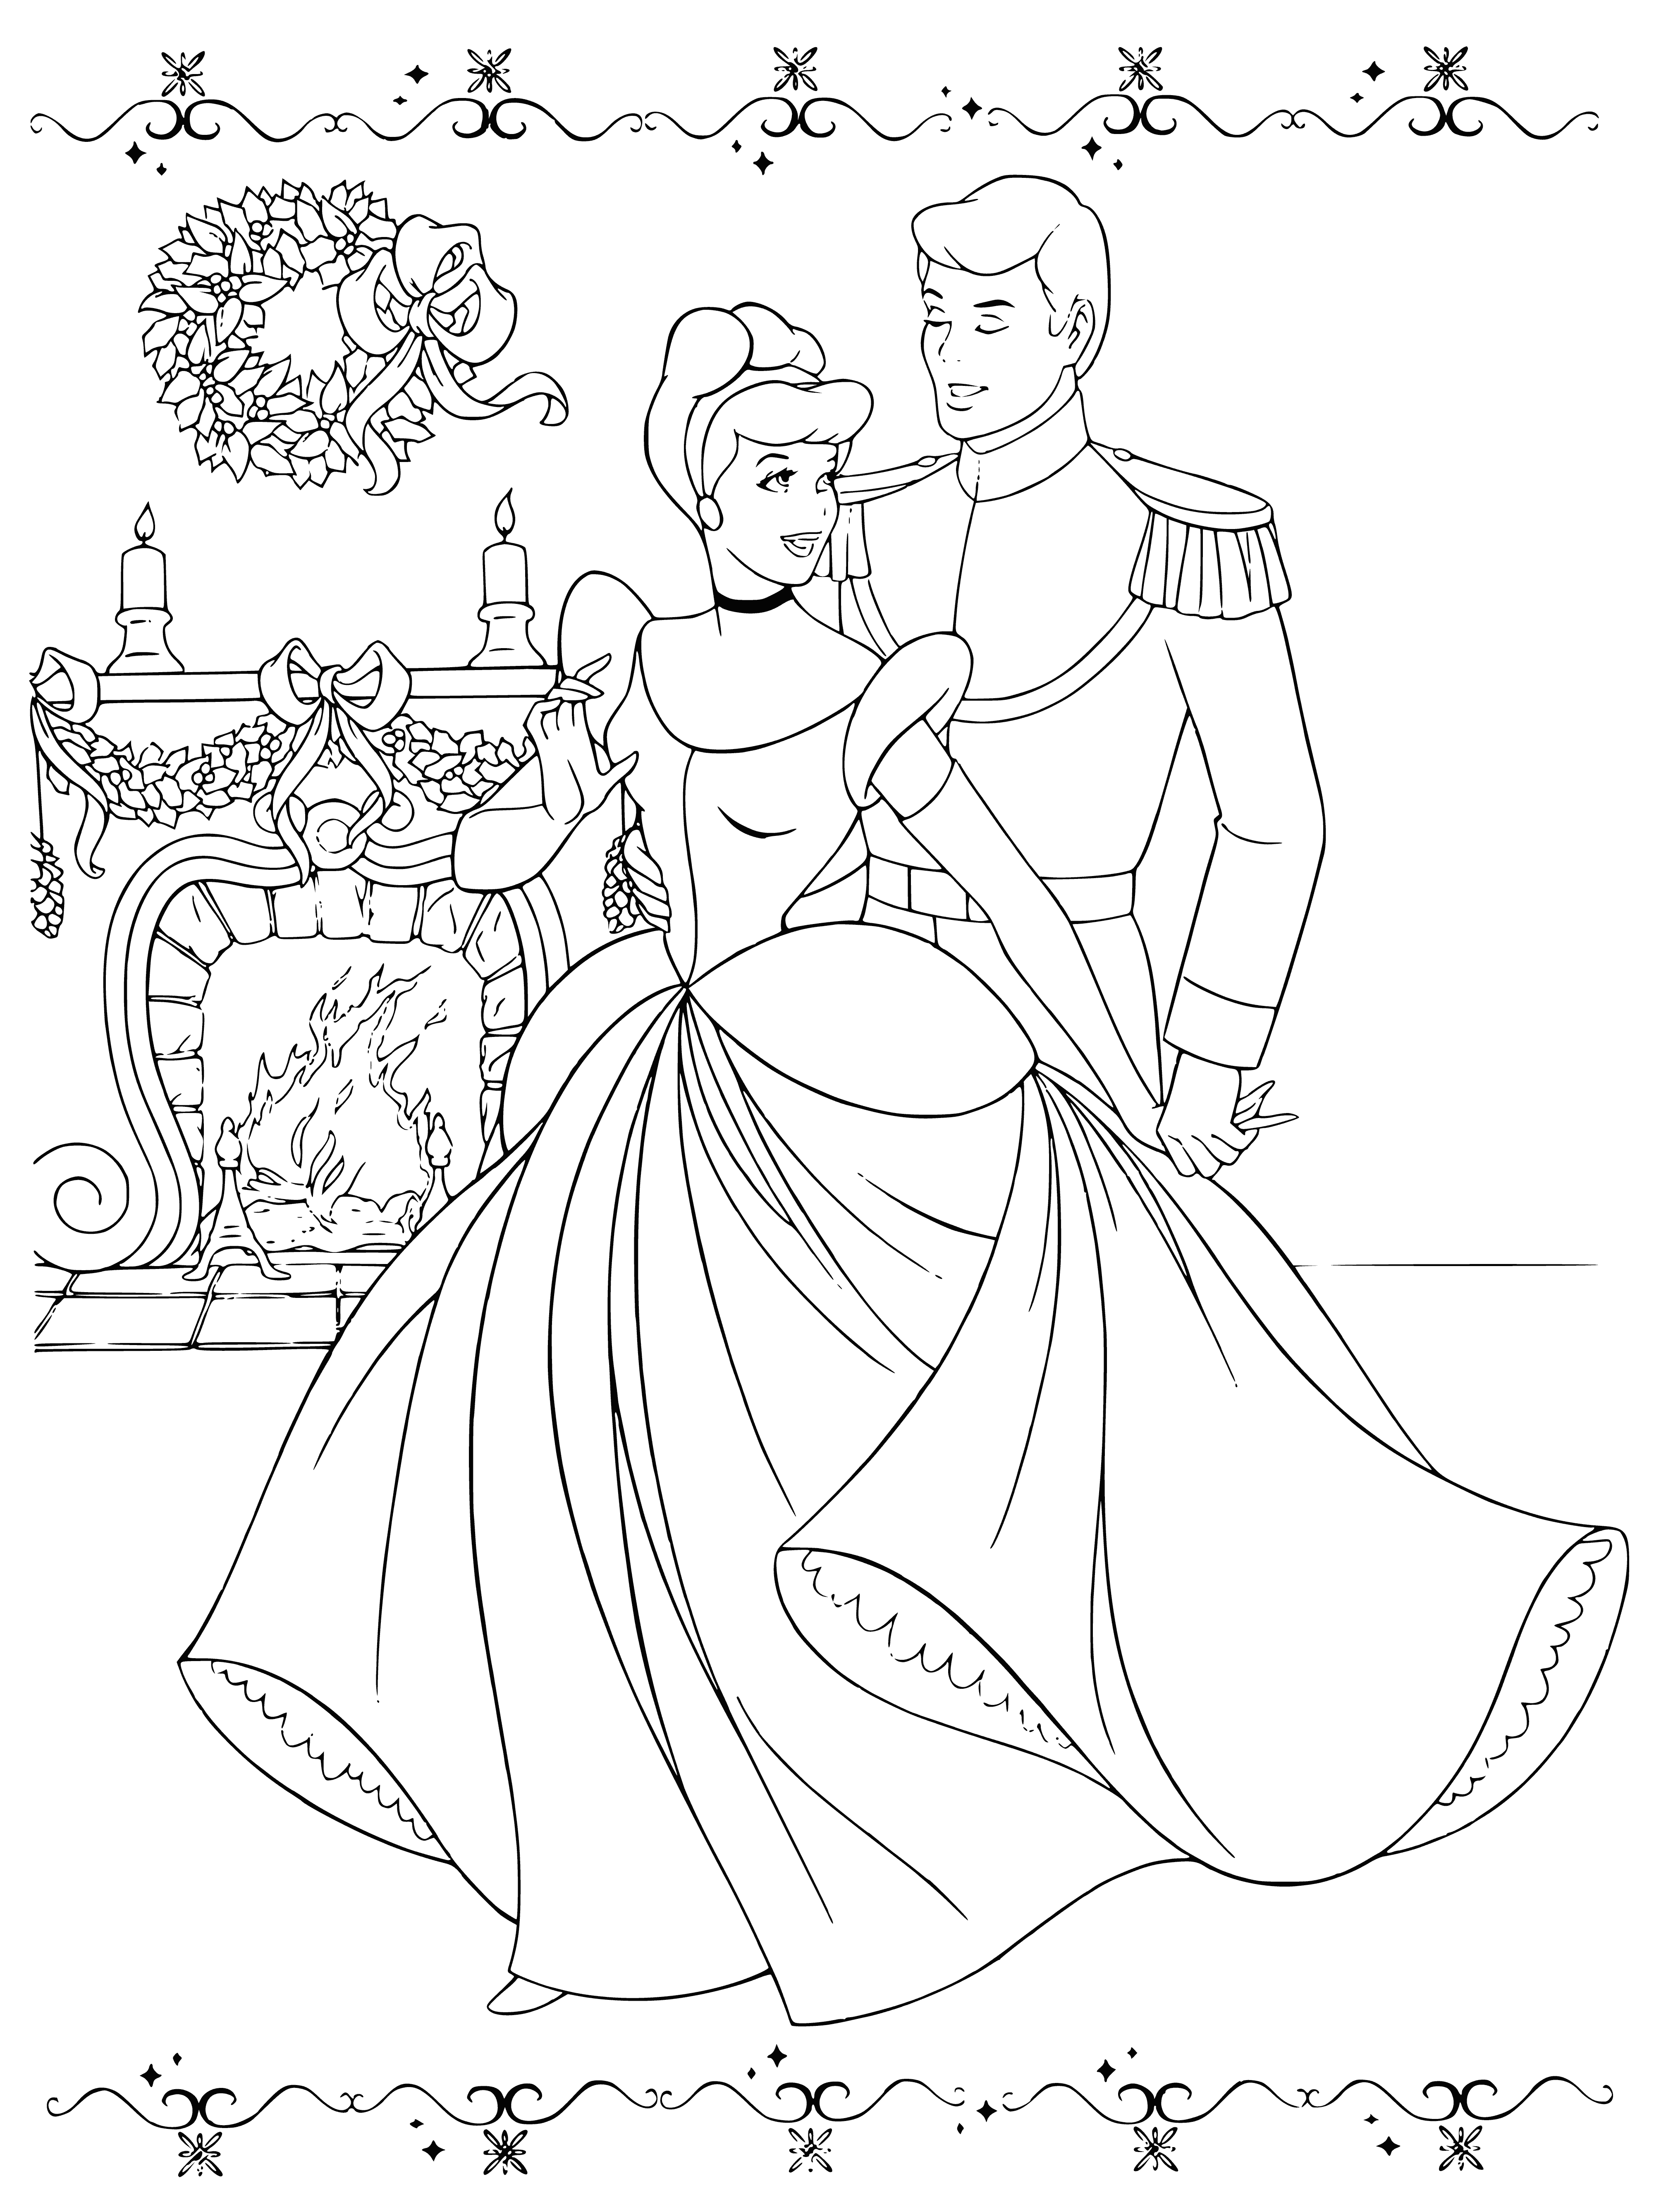 Cinderella with the prince in front of the fireplace coloring page